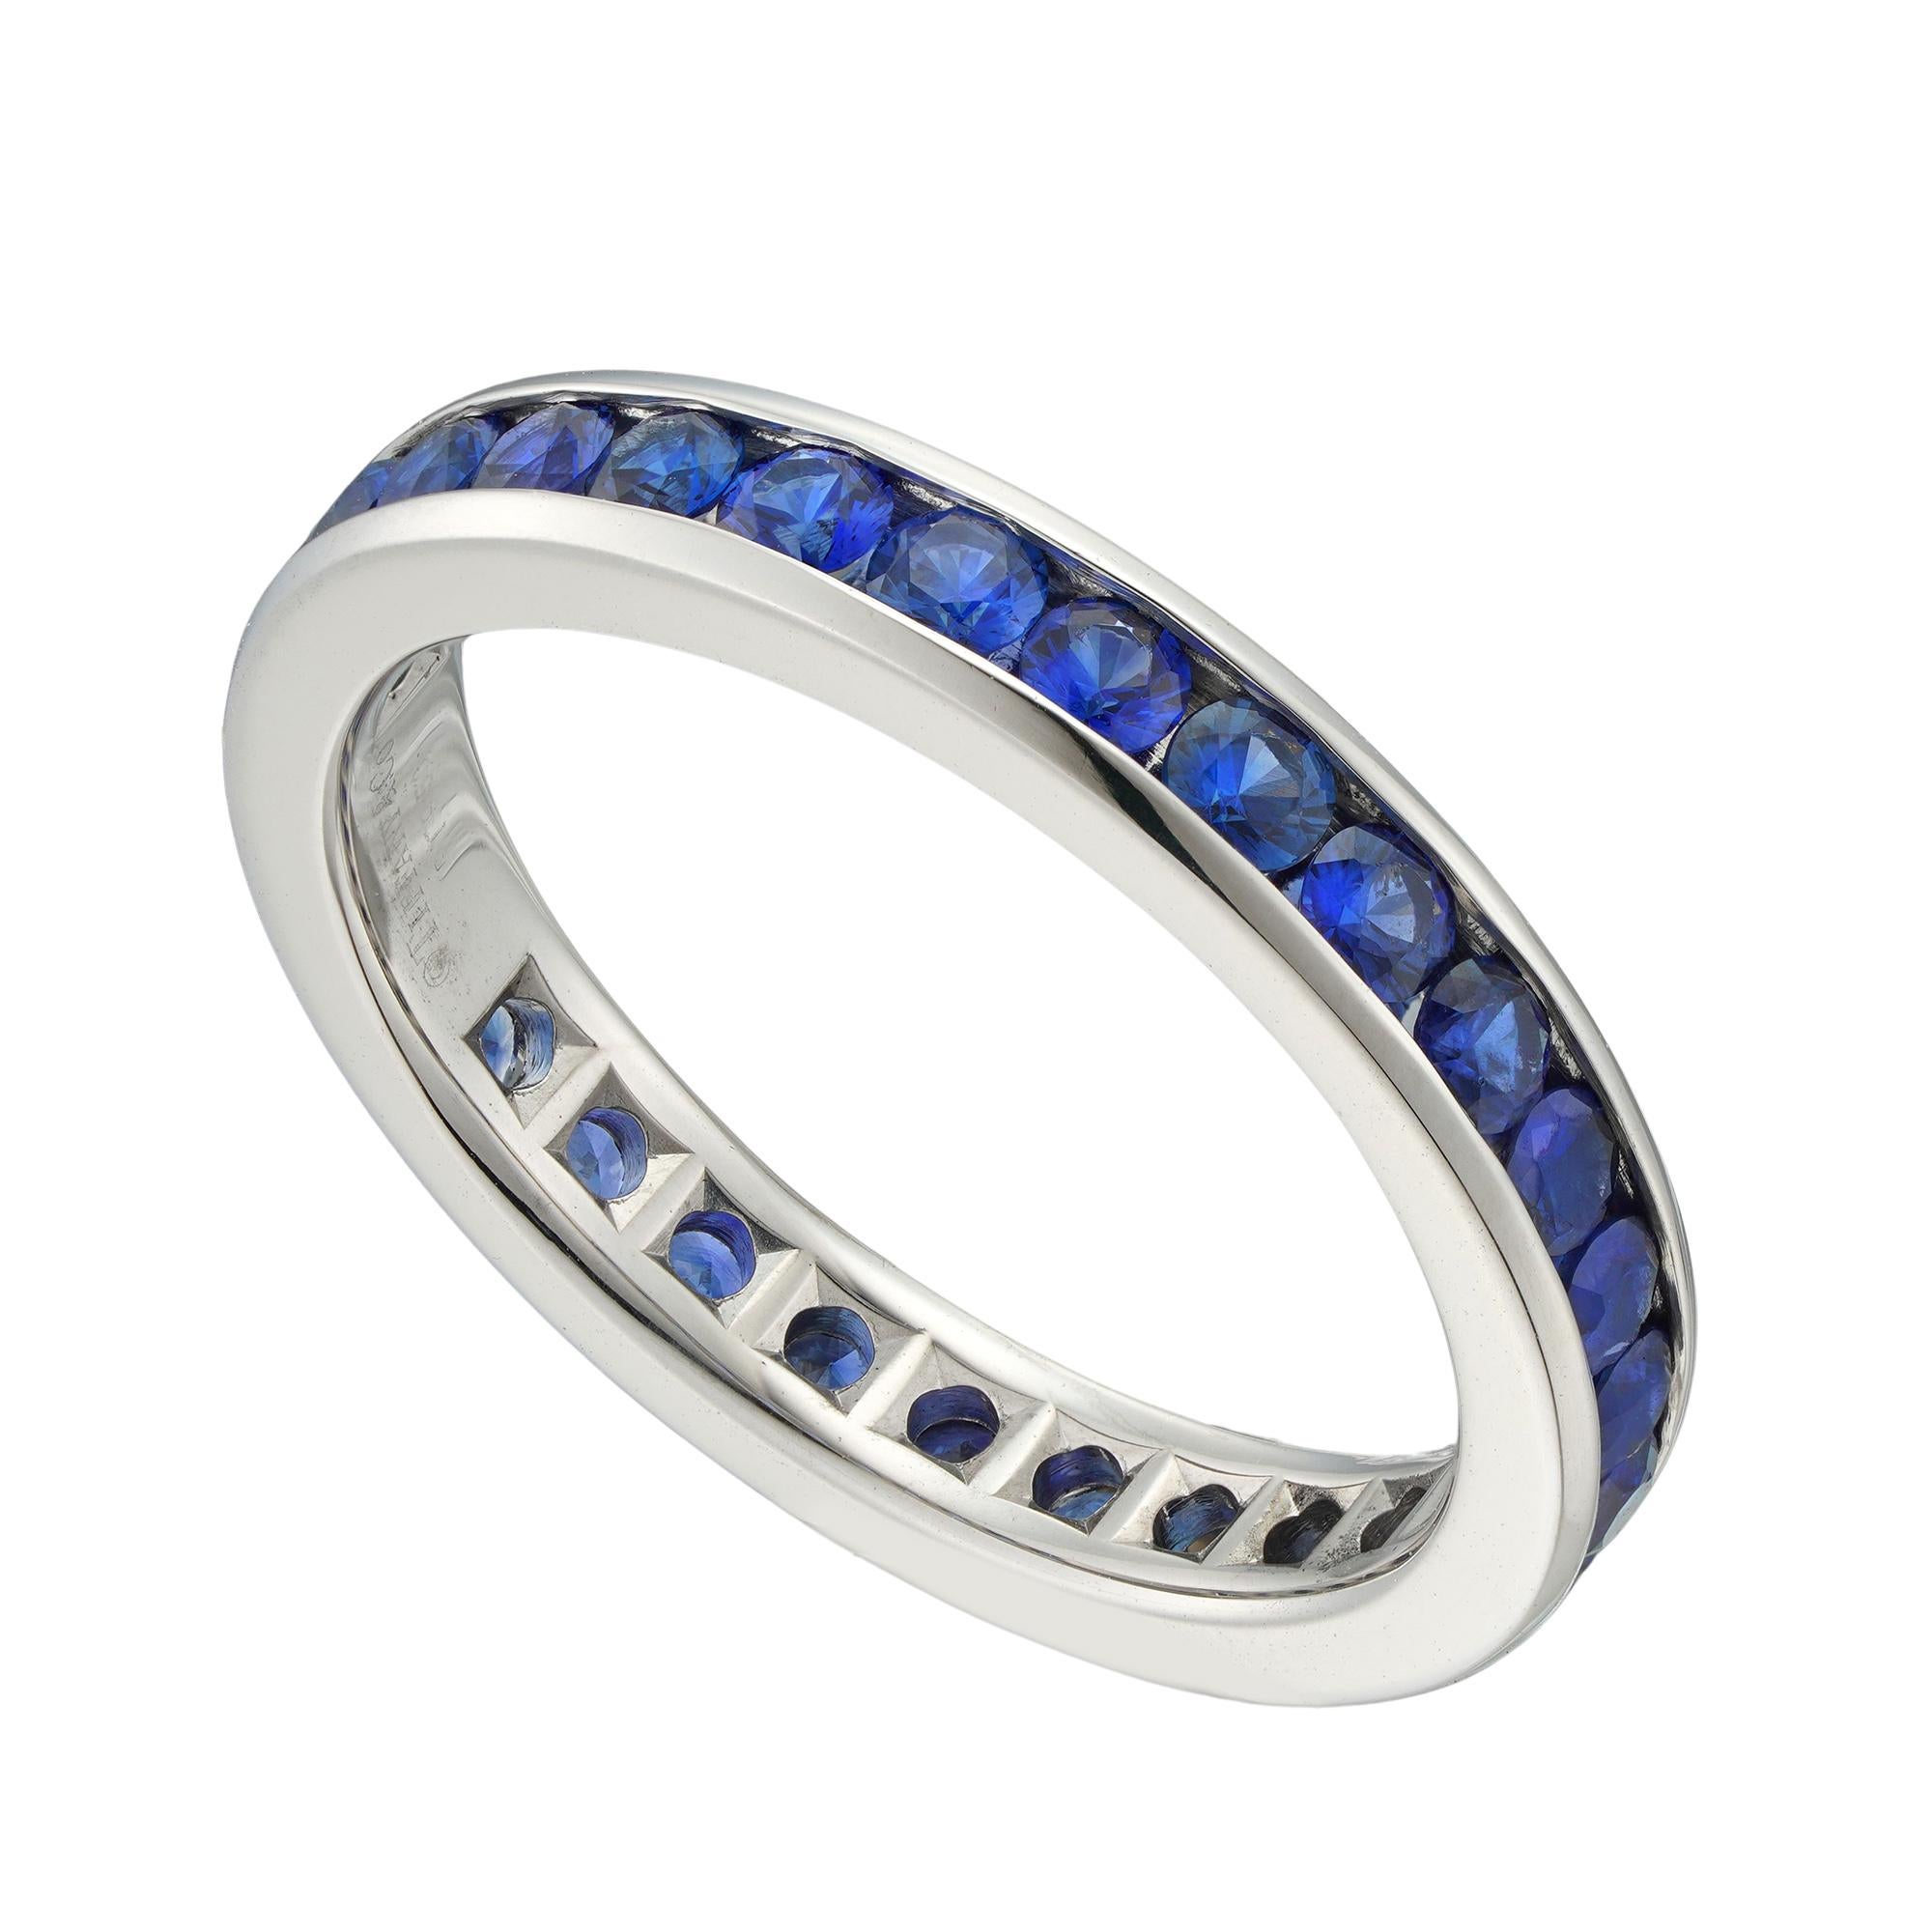 A Tiffany & Co sapphire full eternity ring, set with 28 round faceted sapphires estimated to weigh 1.25 carat all channel-set in platinum mount, marked Tiffany & Co, later hallmarked 950 platinum London, measuring 2.1 x 0.3cm, finger size L, gross